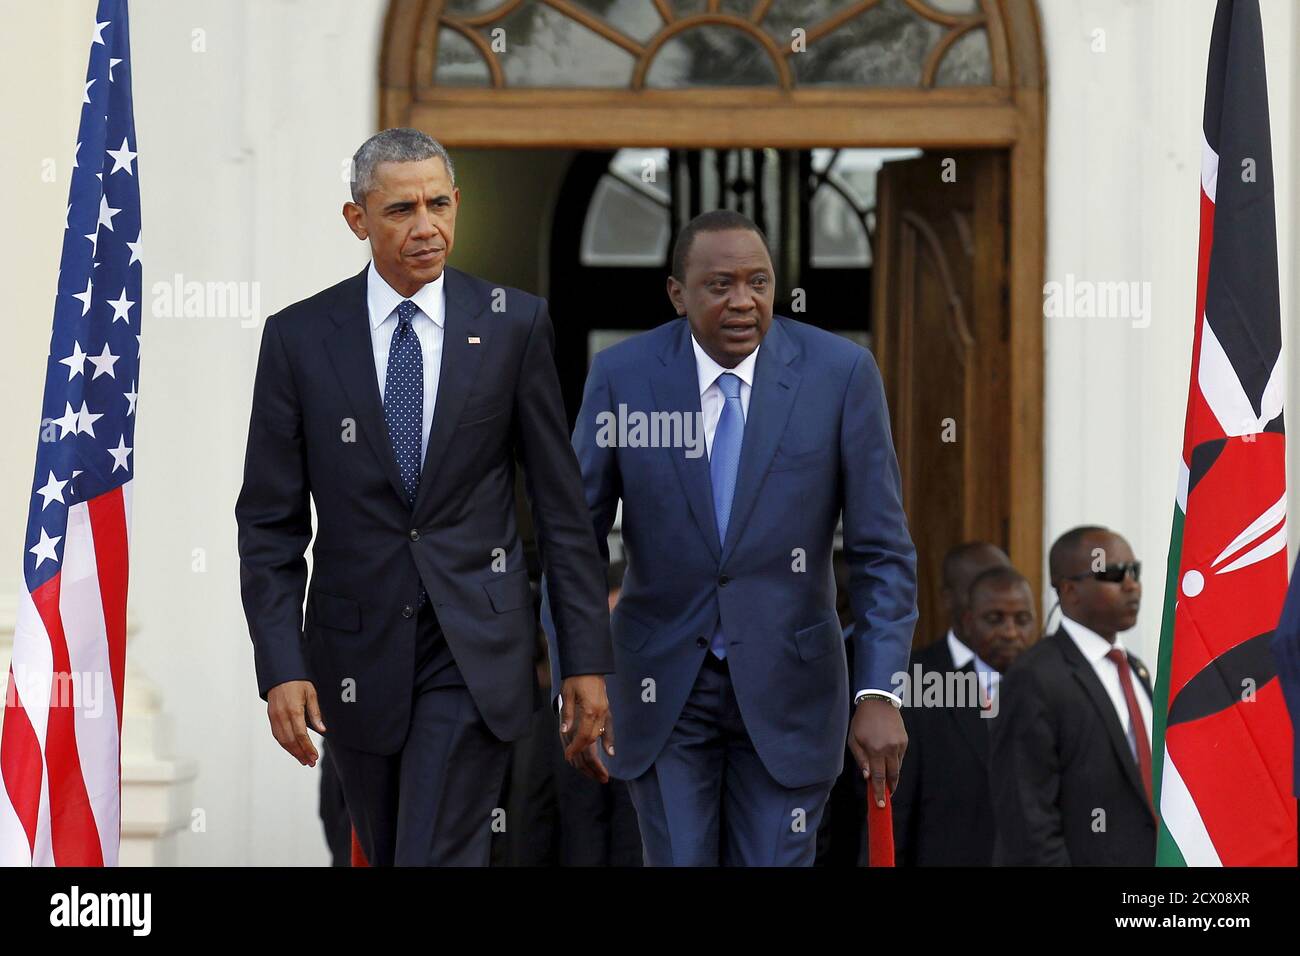 U.S. President Barack Obama (L) arrives together with Kenya's President Uhuru Kenyatta (R) to hold a joint news conference after their meeting at the State House in Nairobi July 25, 2015. Obama told African entrepreneurs in Kenya on Saturday they could help counter violent ideologies and drive growth in Africa, and said governments had to assist by ensuring the rule of law was upheld and by tackling corruption. REUTERS/Thomas Mukoya Stock Photo